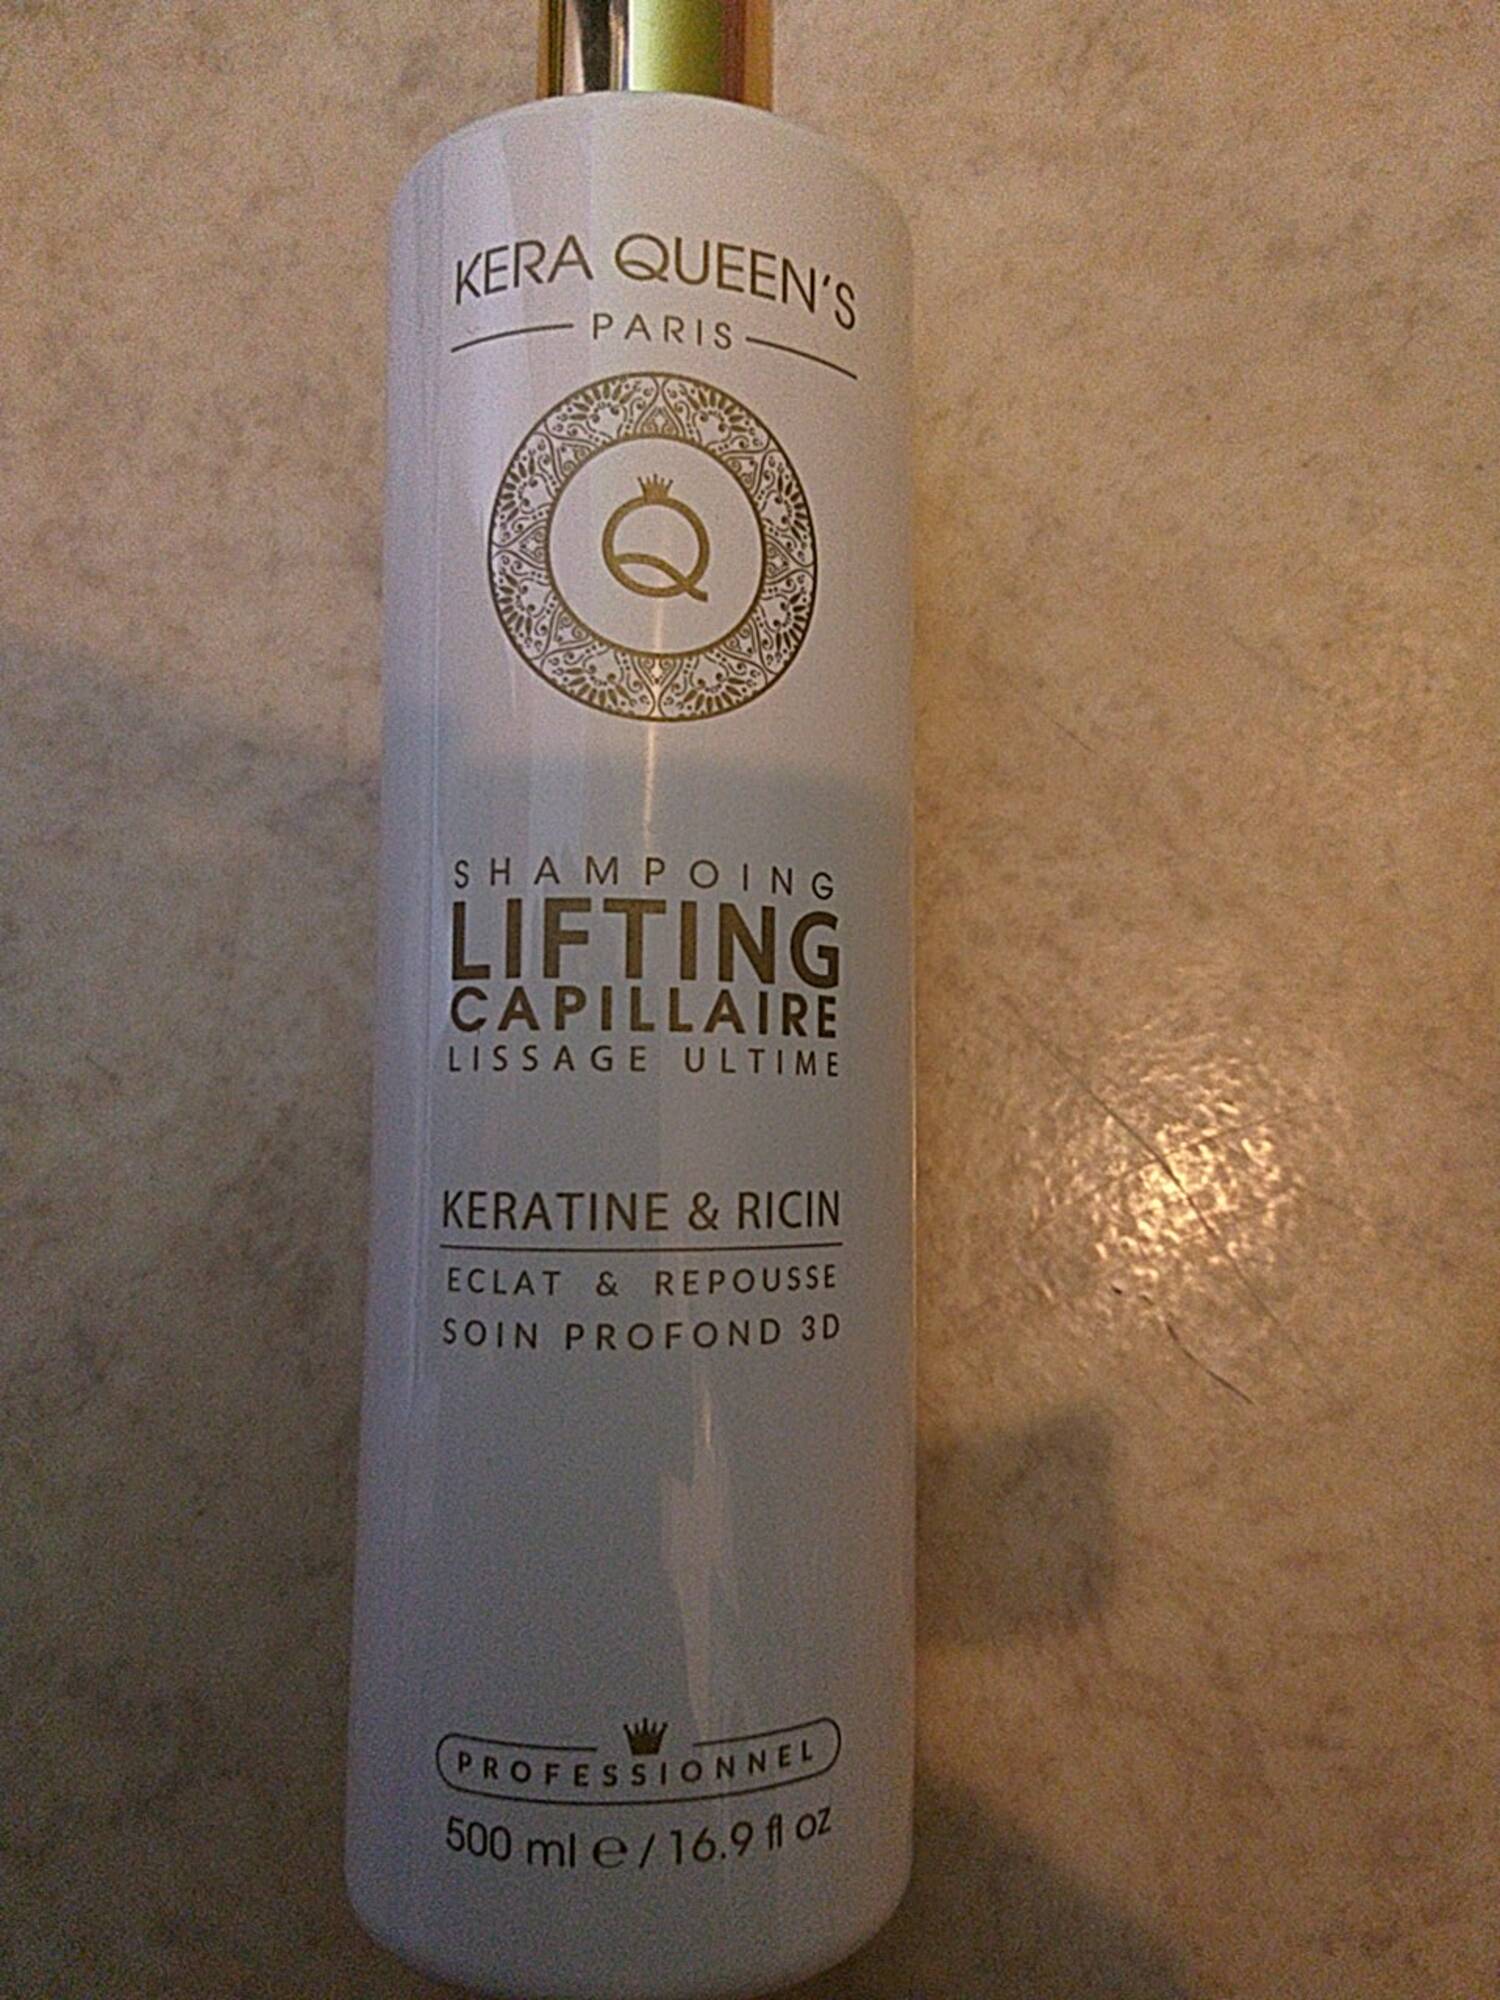 KERA QUEEN'S - Shampooing lifting capillaire